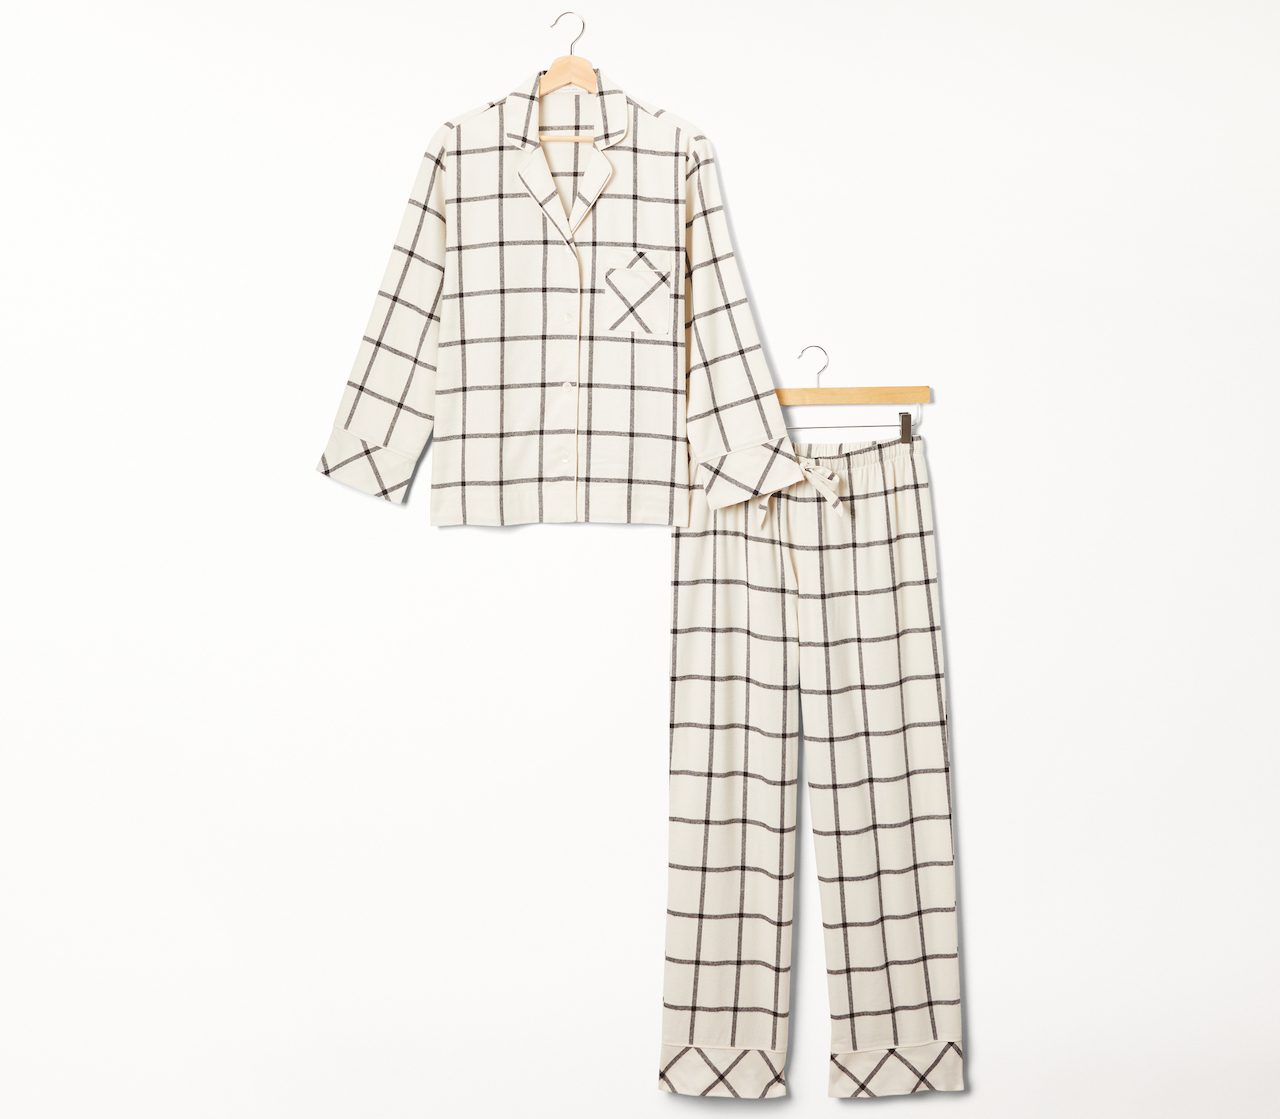 A pair of black and white windowpane plaid pyjamas from Indigo, part of the best Boxing Day sales.